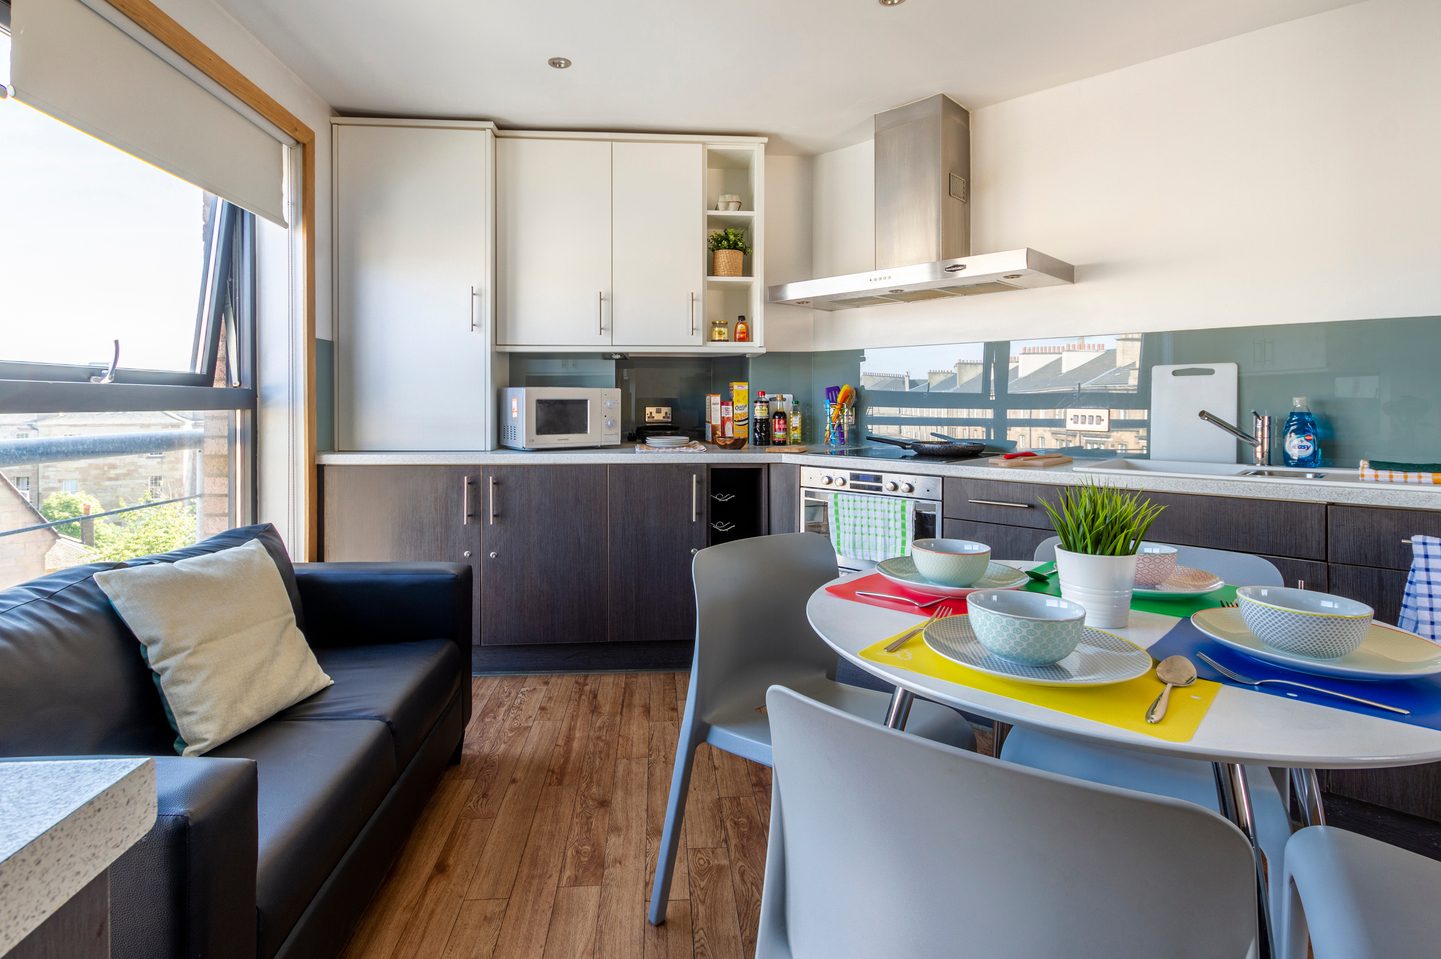 Shared kitchen with a kitchenette a dining table with chairs and a sofa ta